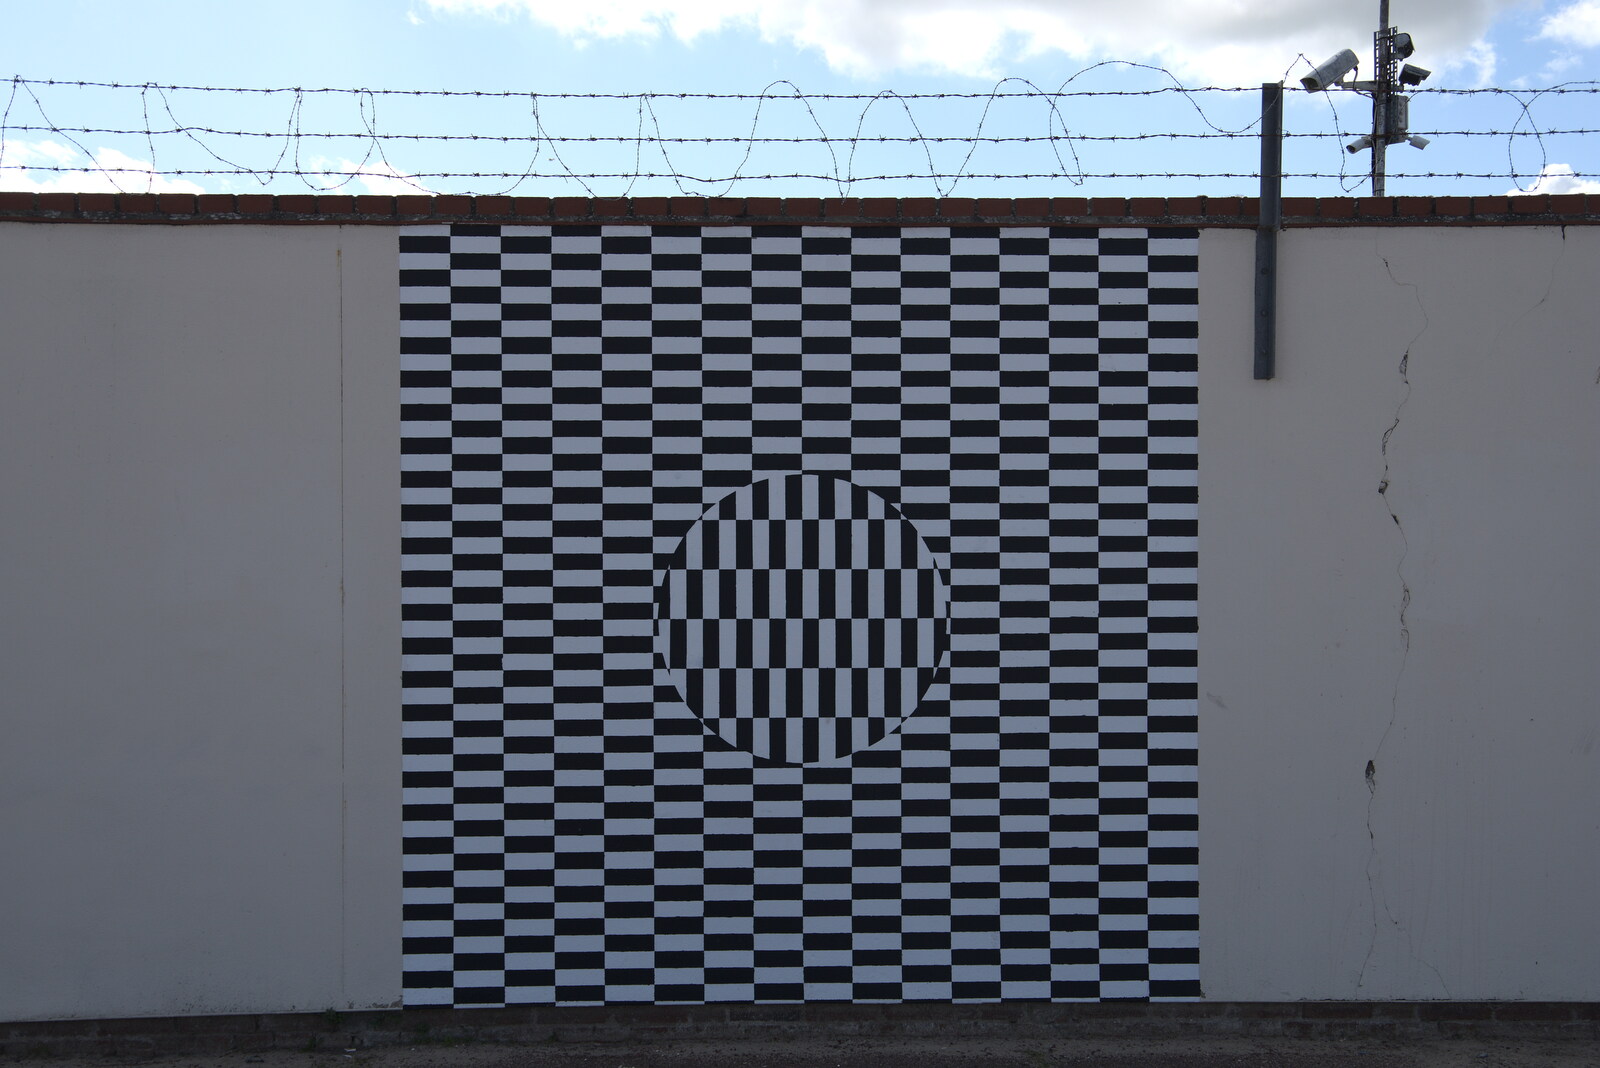 An optical illusion on a prison wall from Faded Seaside Glamour: A Weekend in Great Yarmouth, Norfolk - 29th May 2022